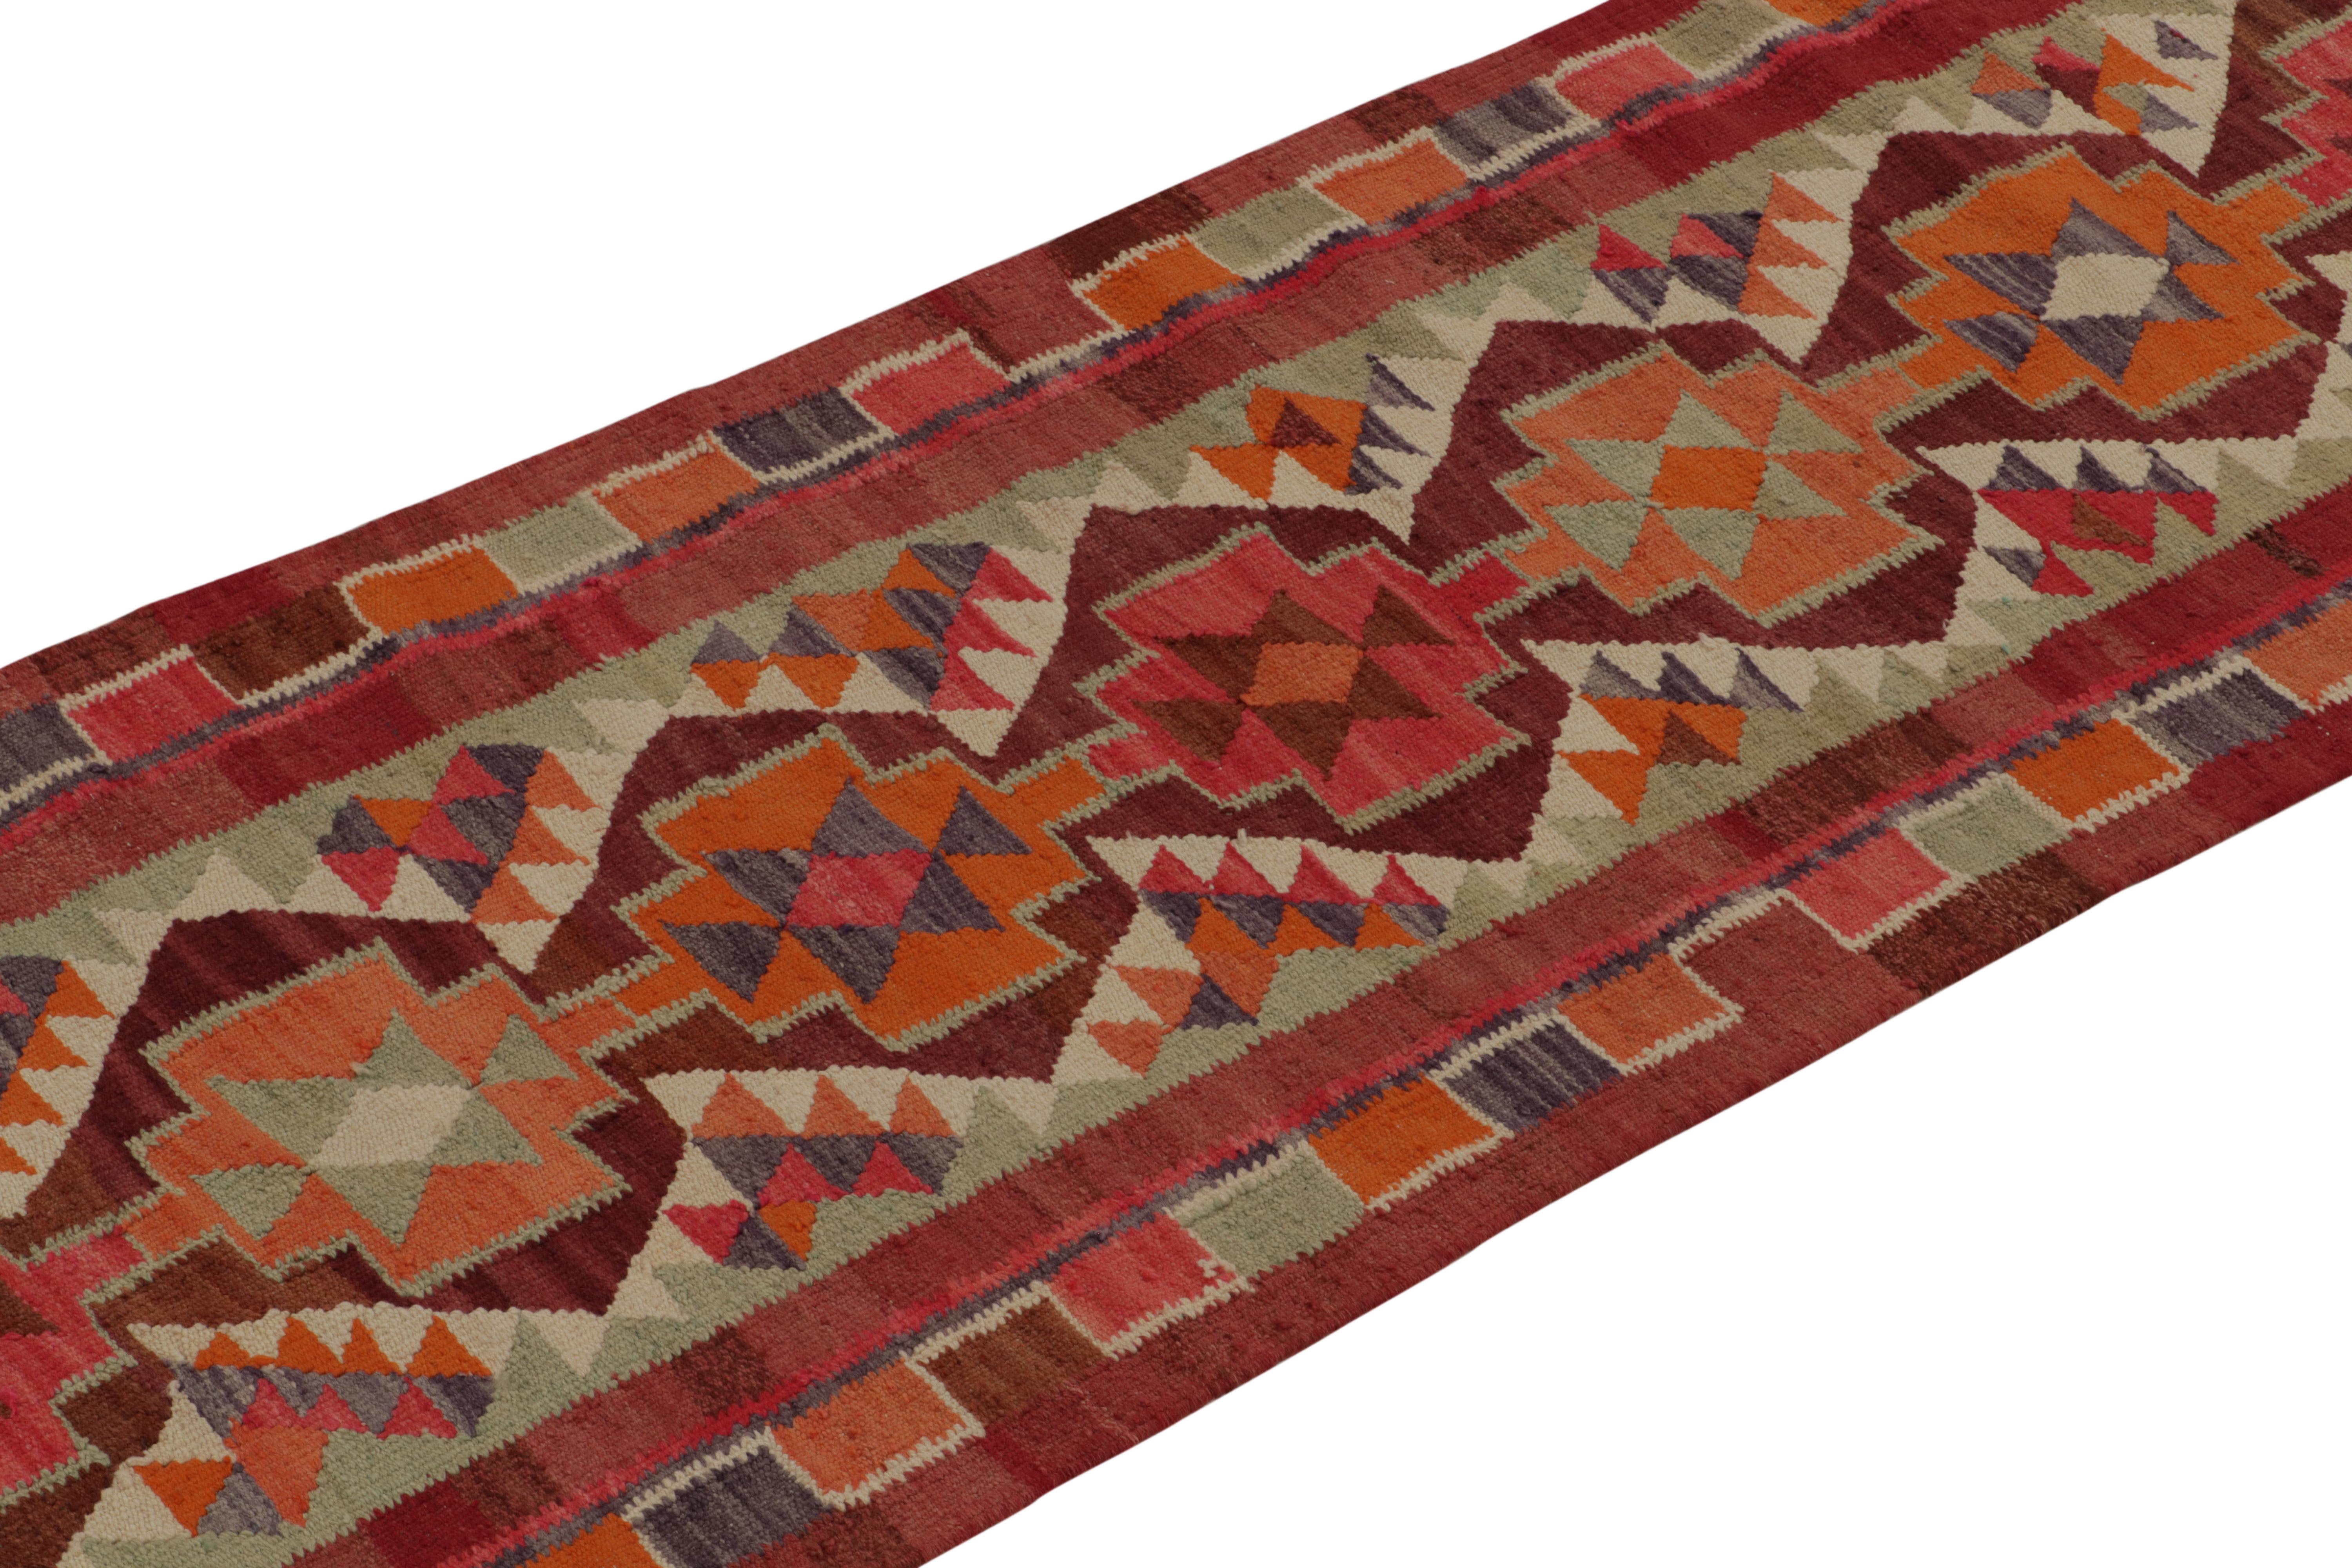 Hand-Knotted Vintage Tribal Kilim Runner in Red Orange and Geometric Pattern by Rug & Kilim For Sale